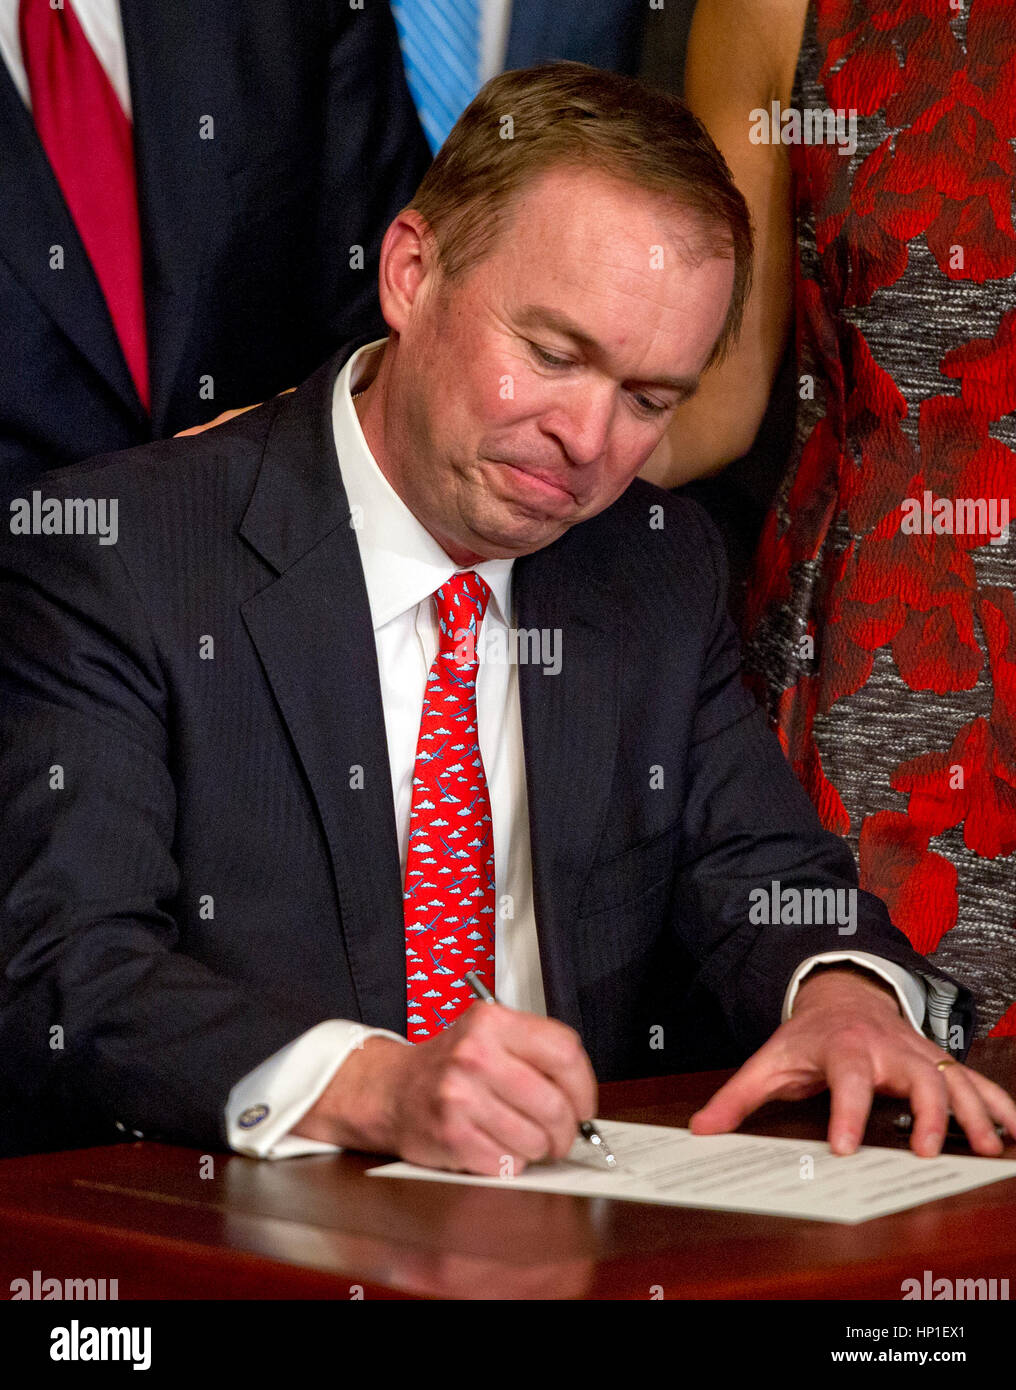 Washington, USA. 16th Feb, 2017. Former United States Representative Mick Mulvaney (Republican of South Carolina) signs the signs the affidavit of appointment after being sworn-in to be Director of the Office of Management and Budget (OMB) by US Vice President Mike Pence in the Vice President's Ceremonial Office at the White House in Washington, DC on Thursday, February 16, 2017. Credit: Ron Sachs/Pool via CNP Foto: Ron Sachs/Consolidated/dpa/Alamy Live News Stock Photo